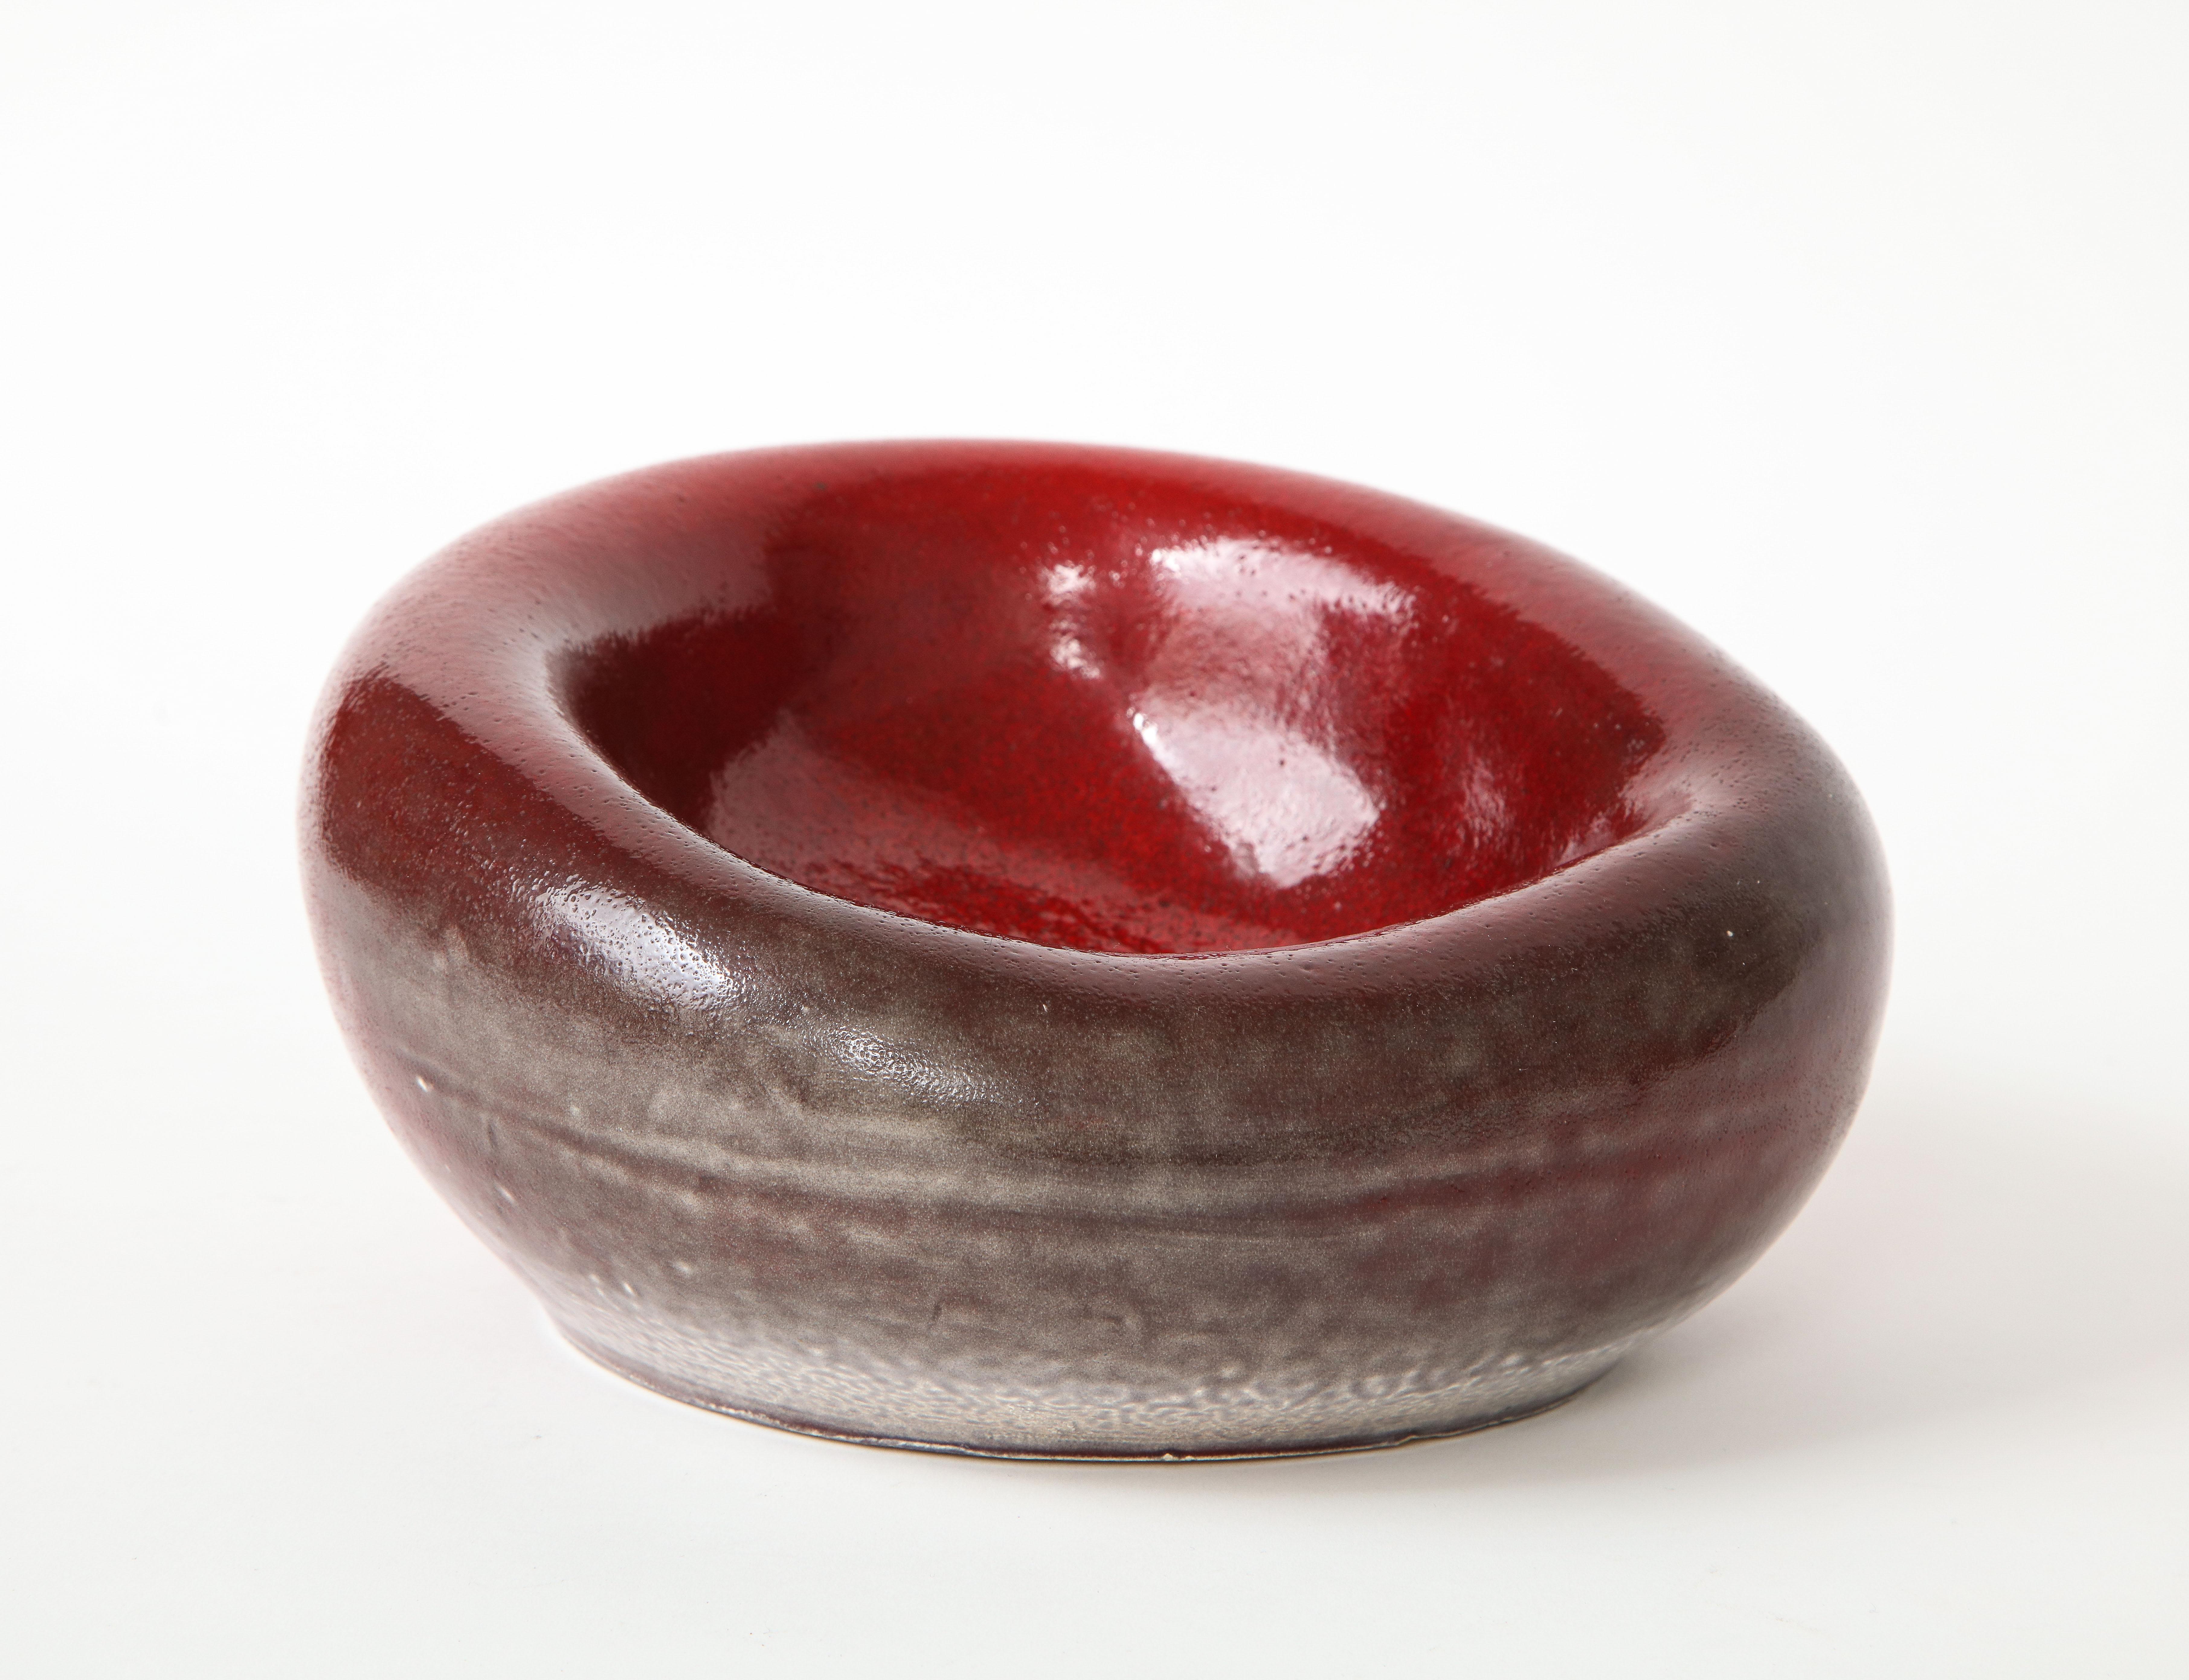 Stunning red ceramic bowl in the manner of Denise Gatard, France, c. 1960s.

Elegant free-form bowl executed in deep glazed red with crackle and mottled finishes.